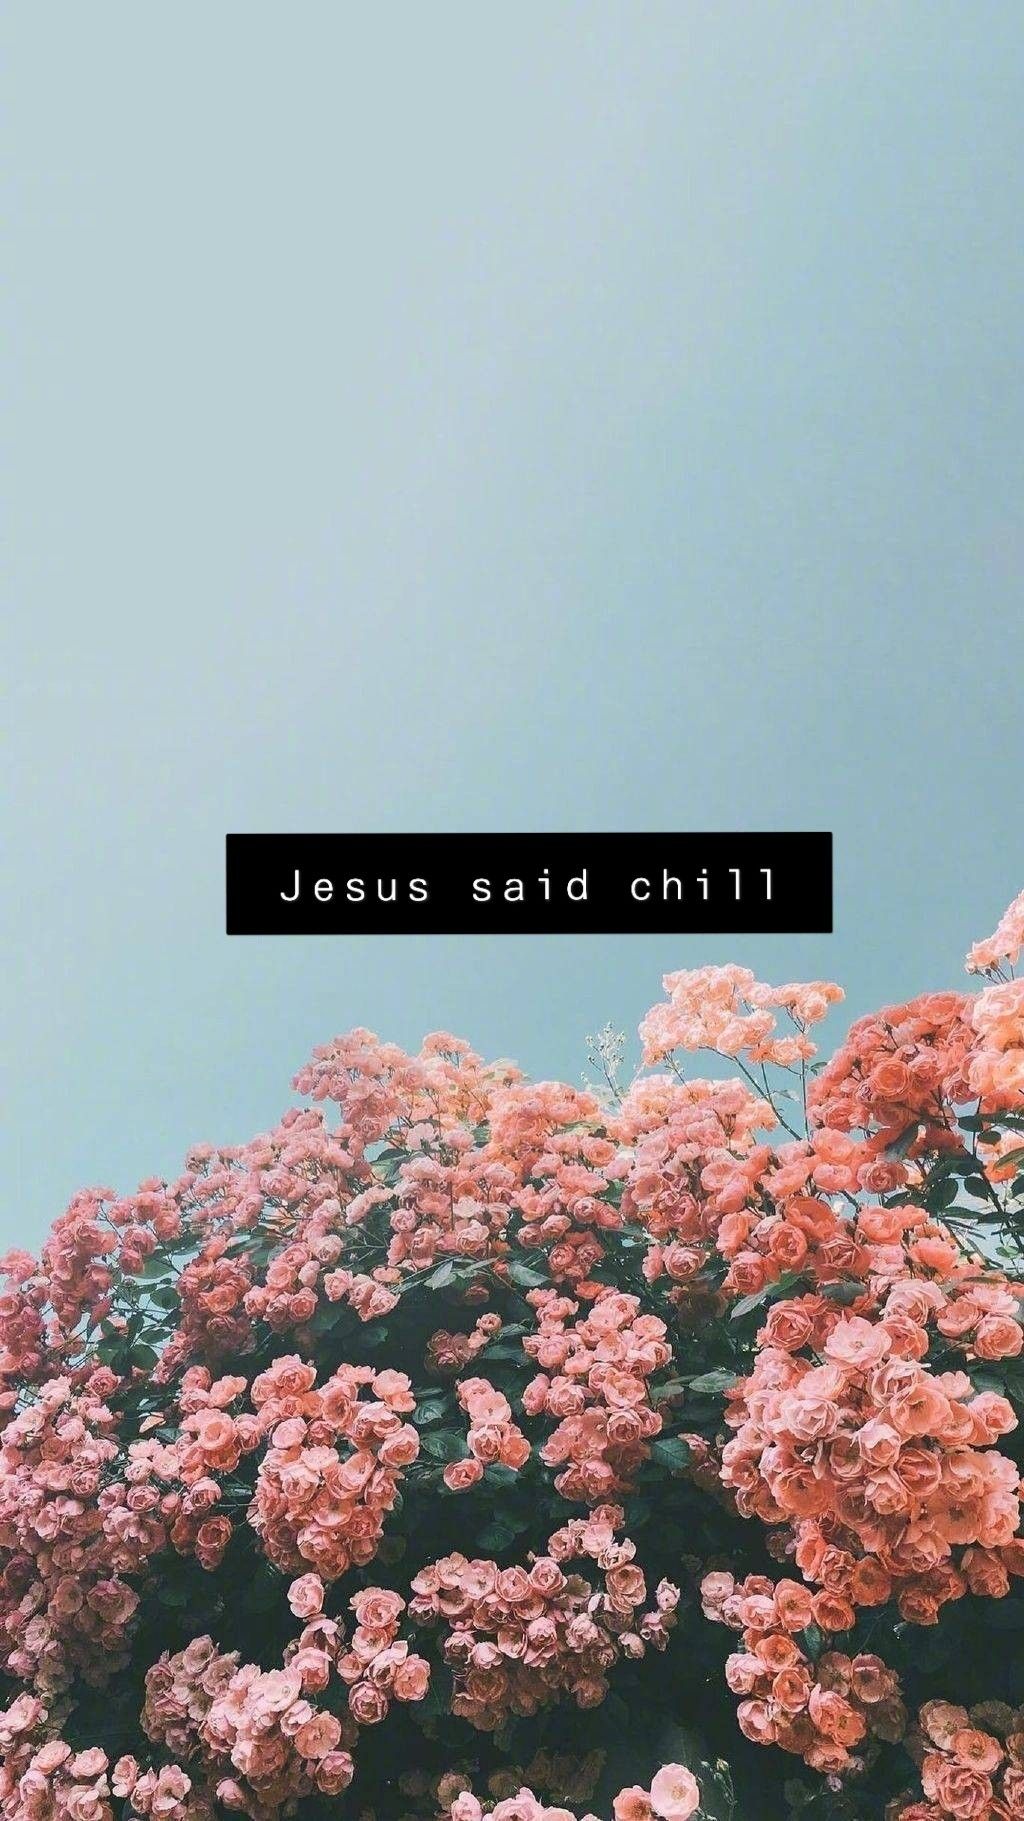 Aesthetic phone background with a quote from Jesus saying 